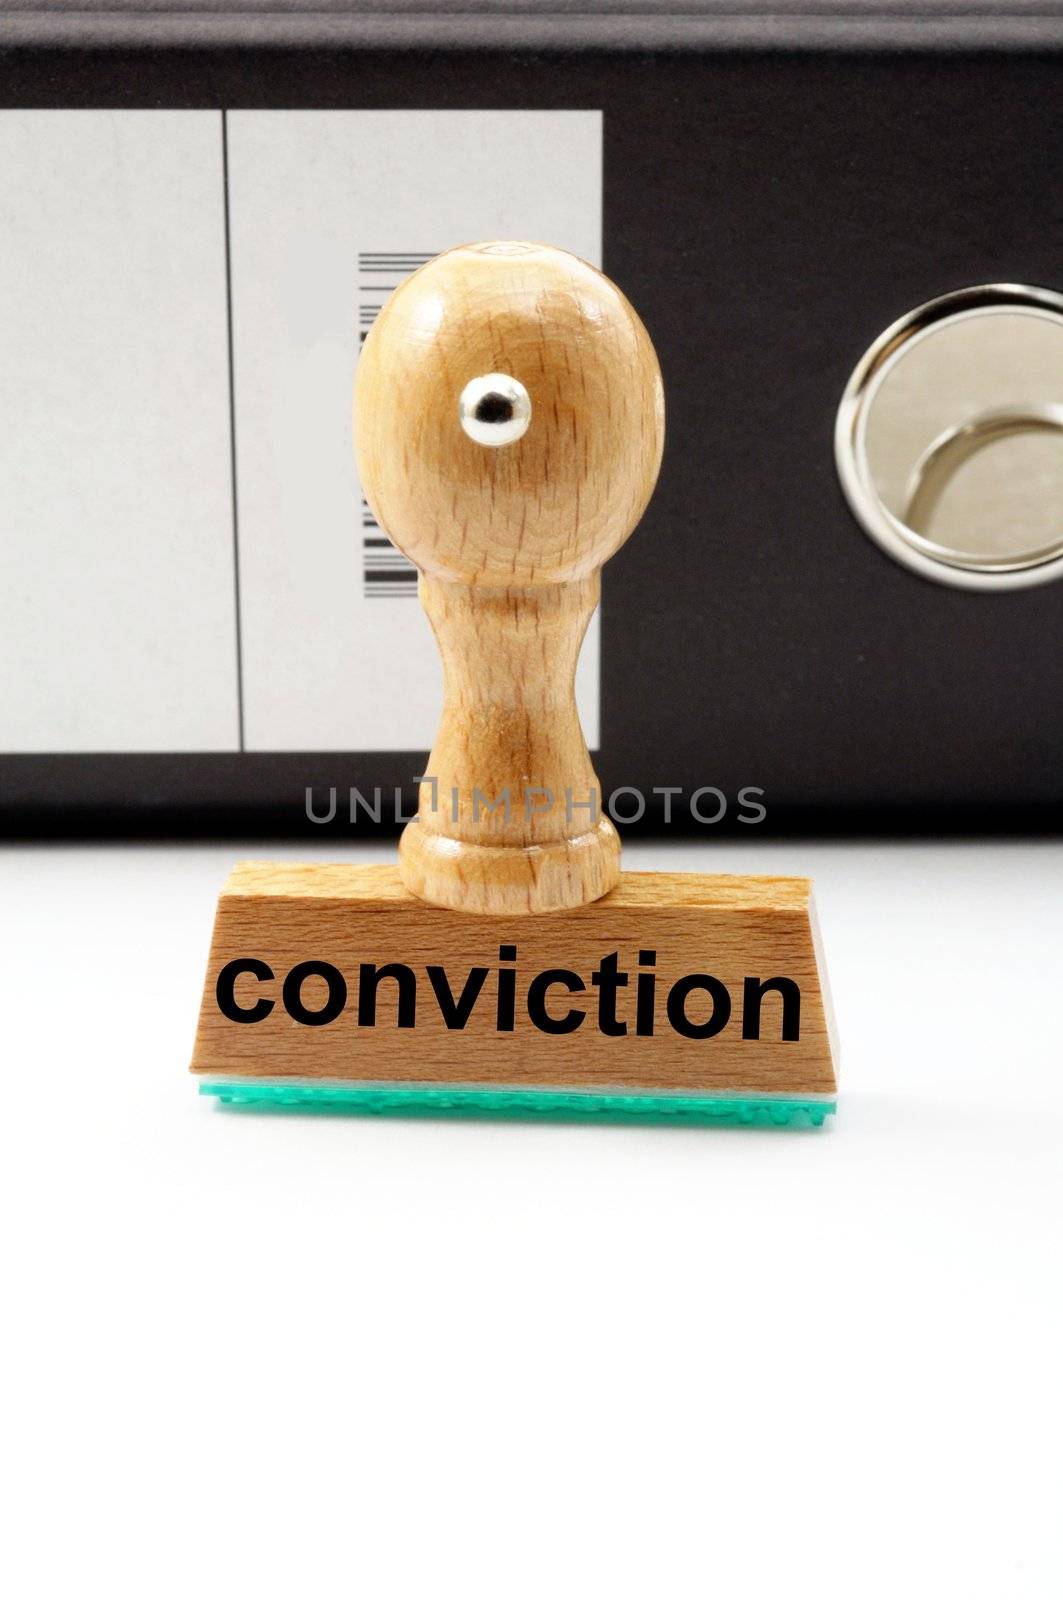 conviction on stamp in office showing law or crime concept with copyspace